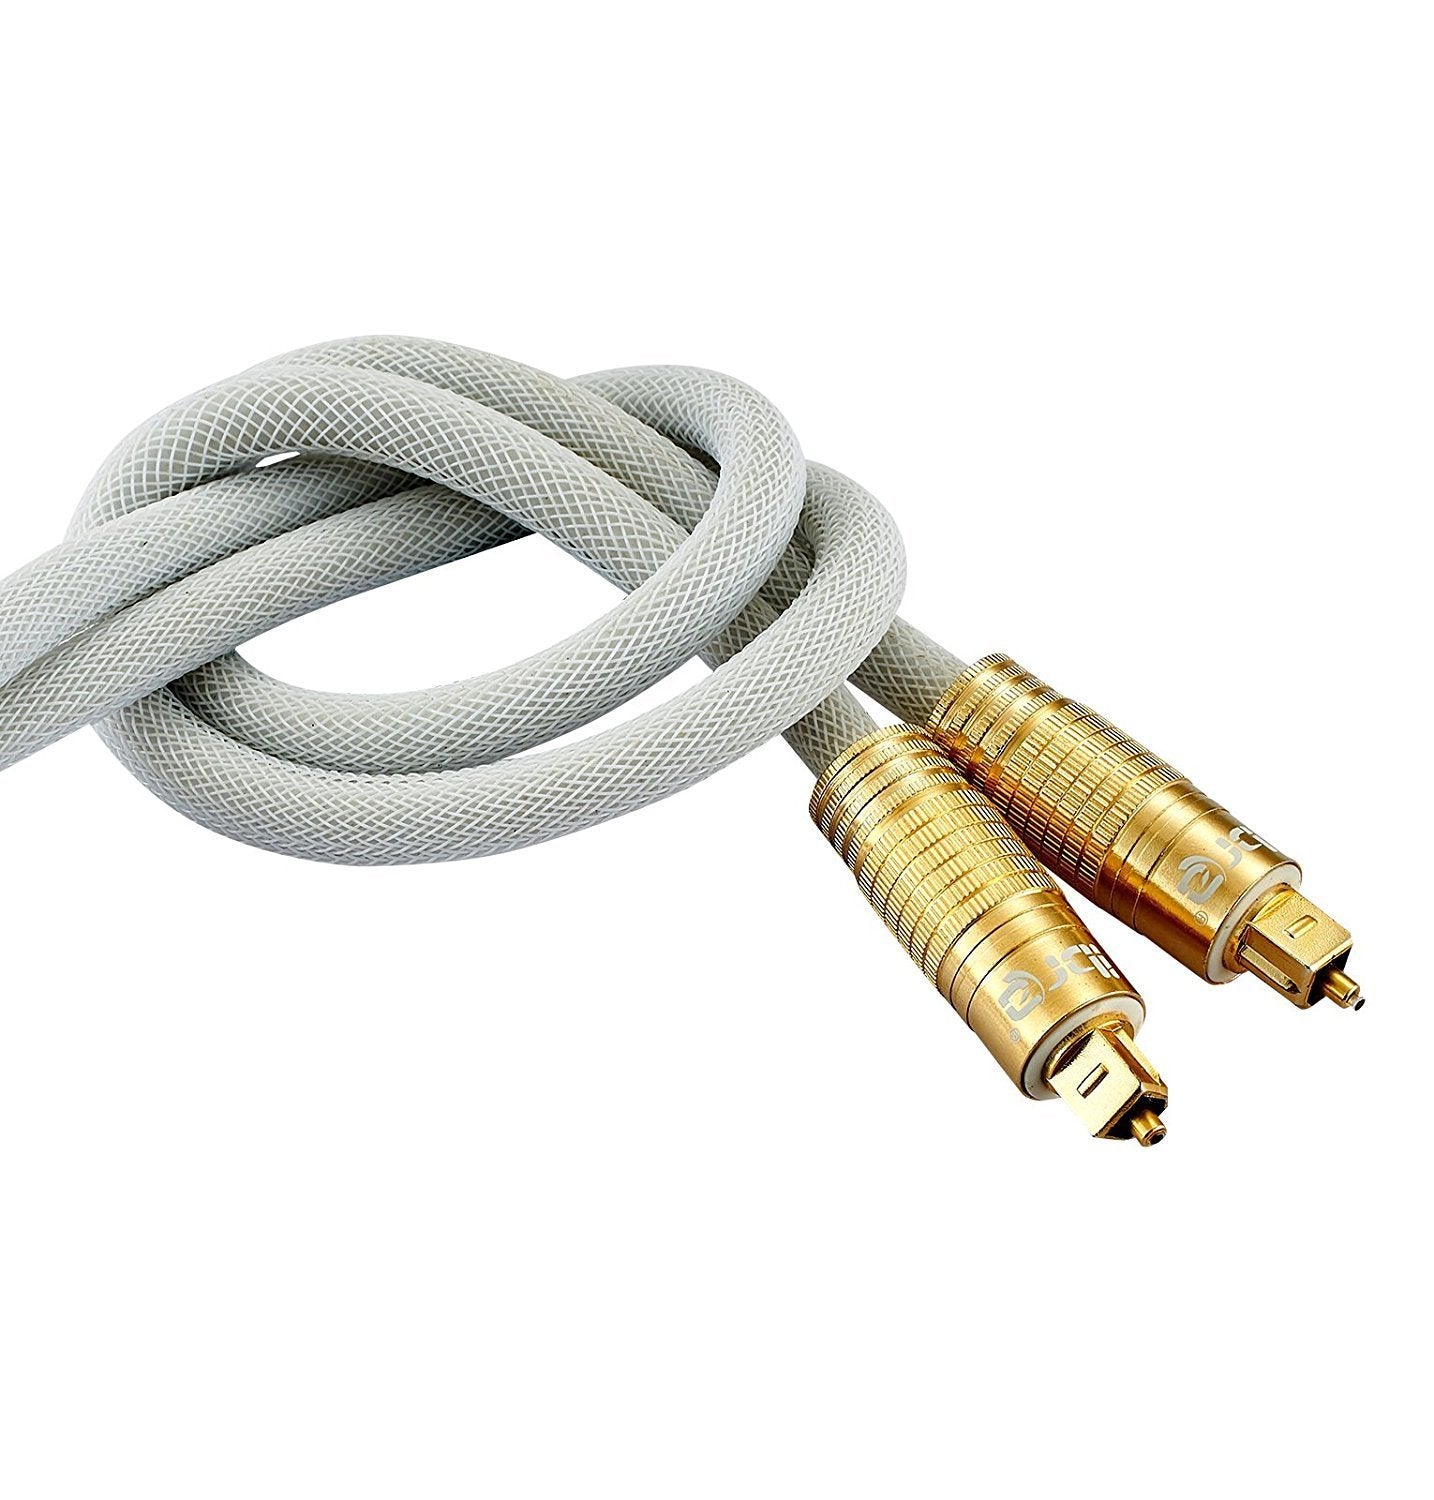 Optical Toslink Digital Audio Cable - 24k Gold Casing - Suitable for PS3,Sky,Sky HD,LCD,LED,Plasma, Blu Ray to Connect with Home Cinema Systems,AV Amps - 2M - IBRA PREMIUM WHITE